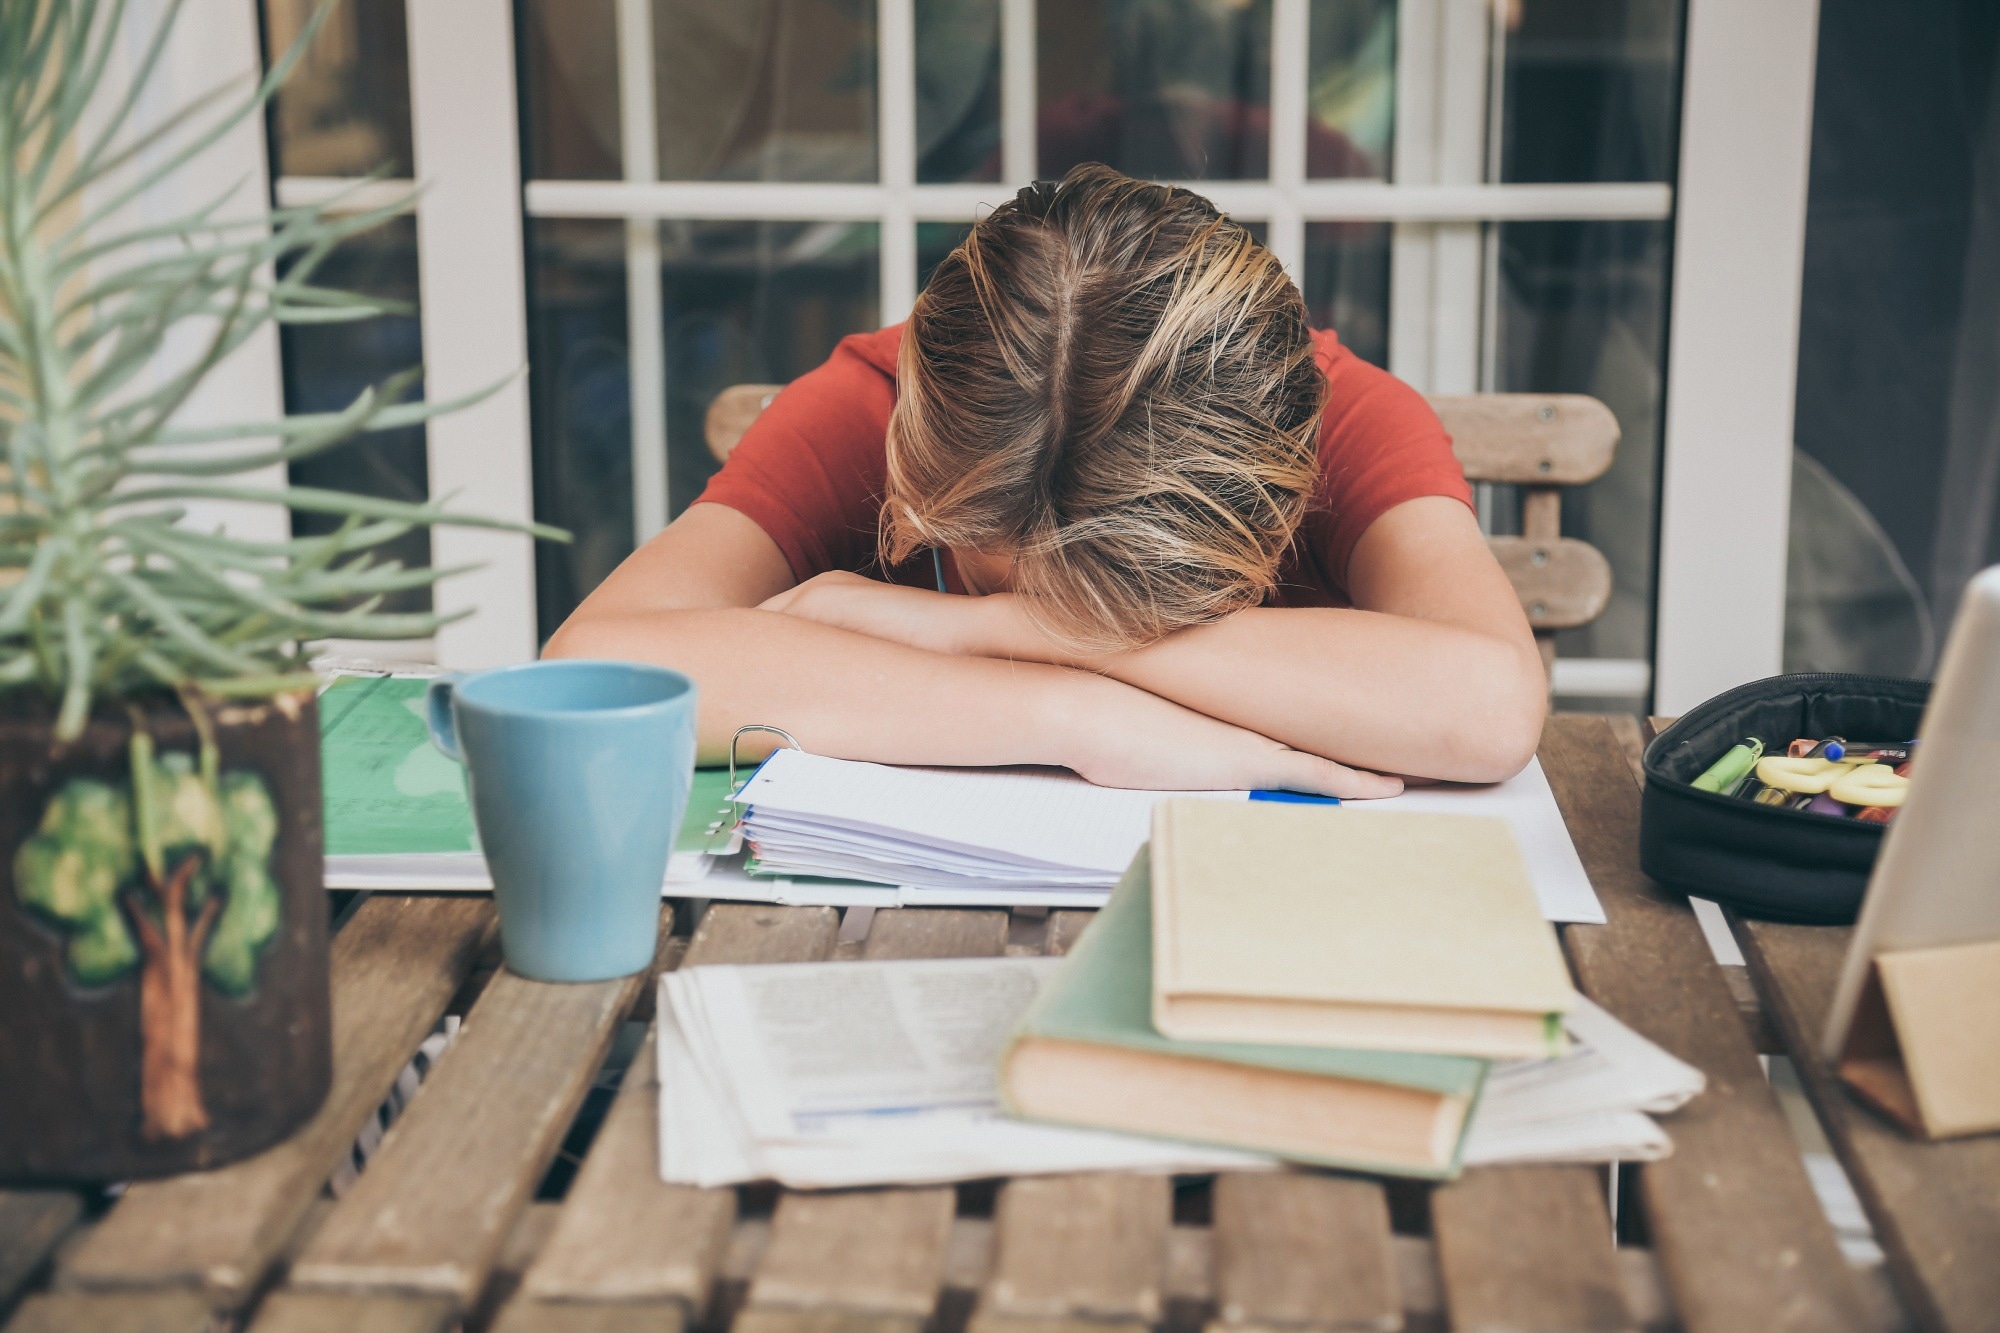 Study: Structural brain changes in patients with post-COVID fatigue: a prospective observational study. Image Credit: Fabio Principe/Shutterstock